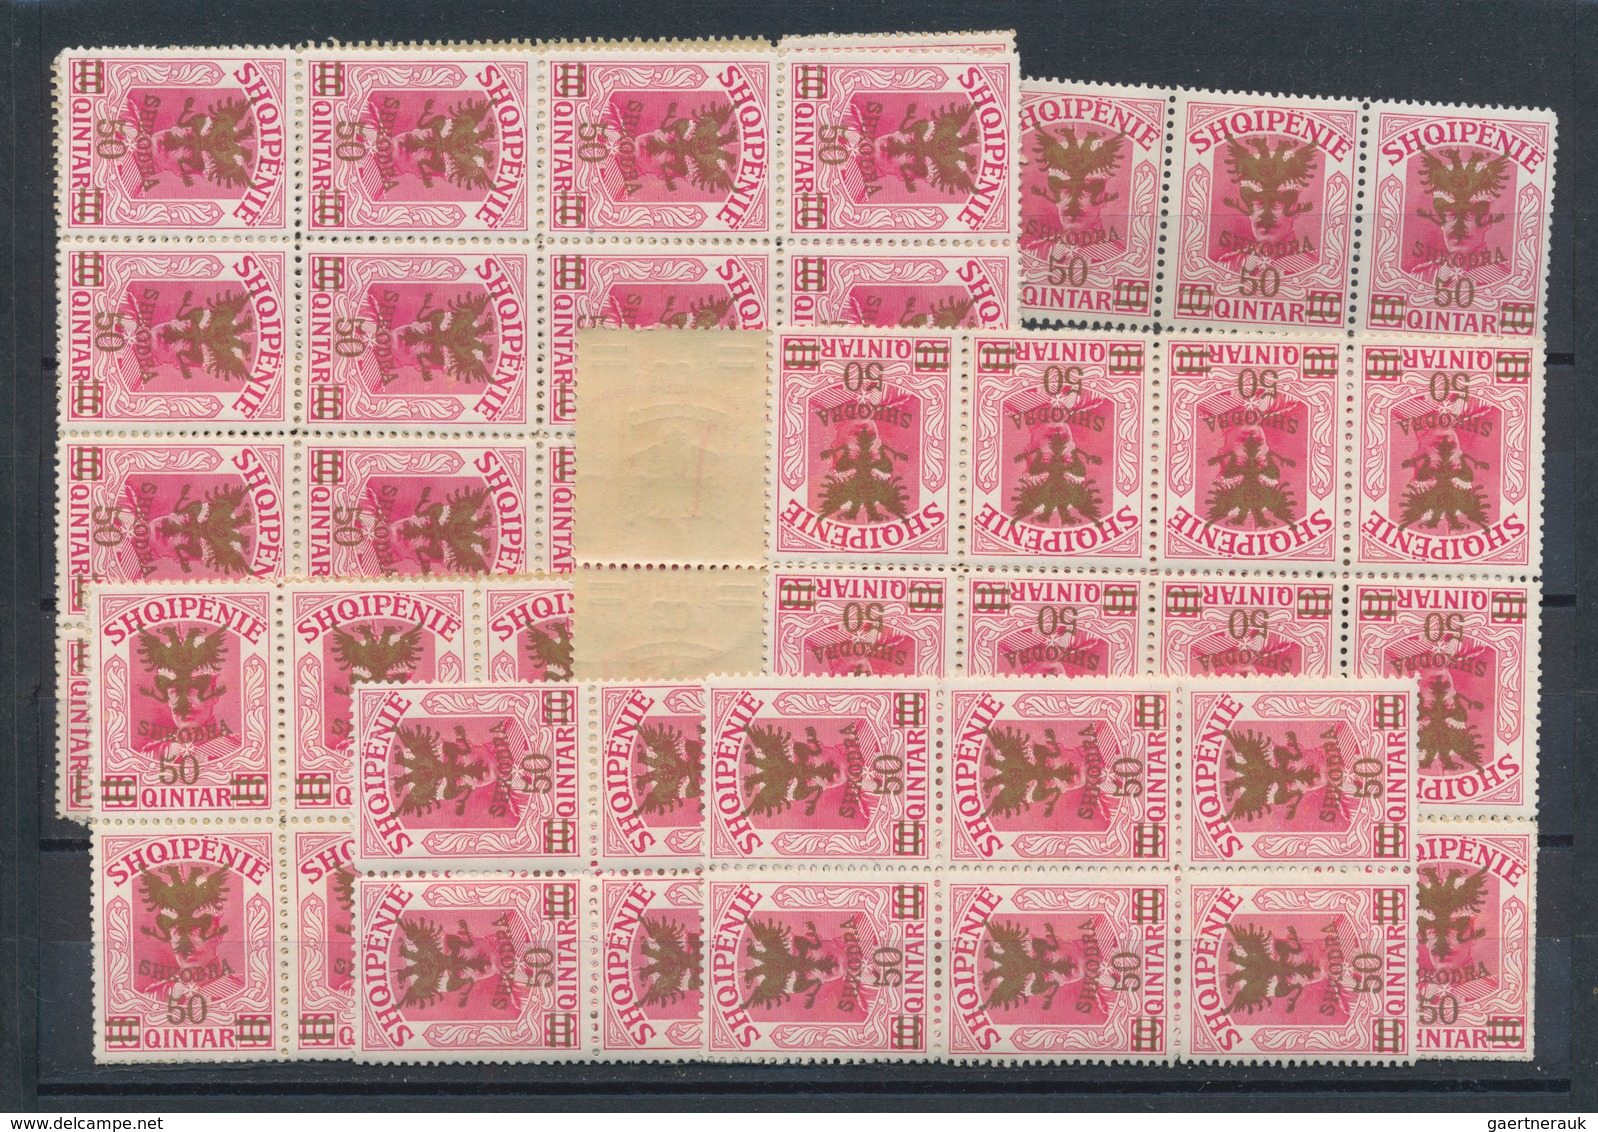 Albanien: 1920/1928, stock only MNH issues in units offering these quantities: Michel no. 74 (150 co